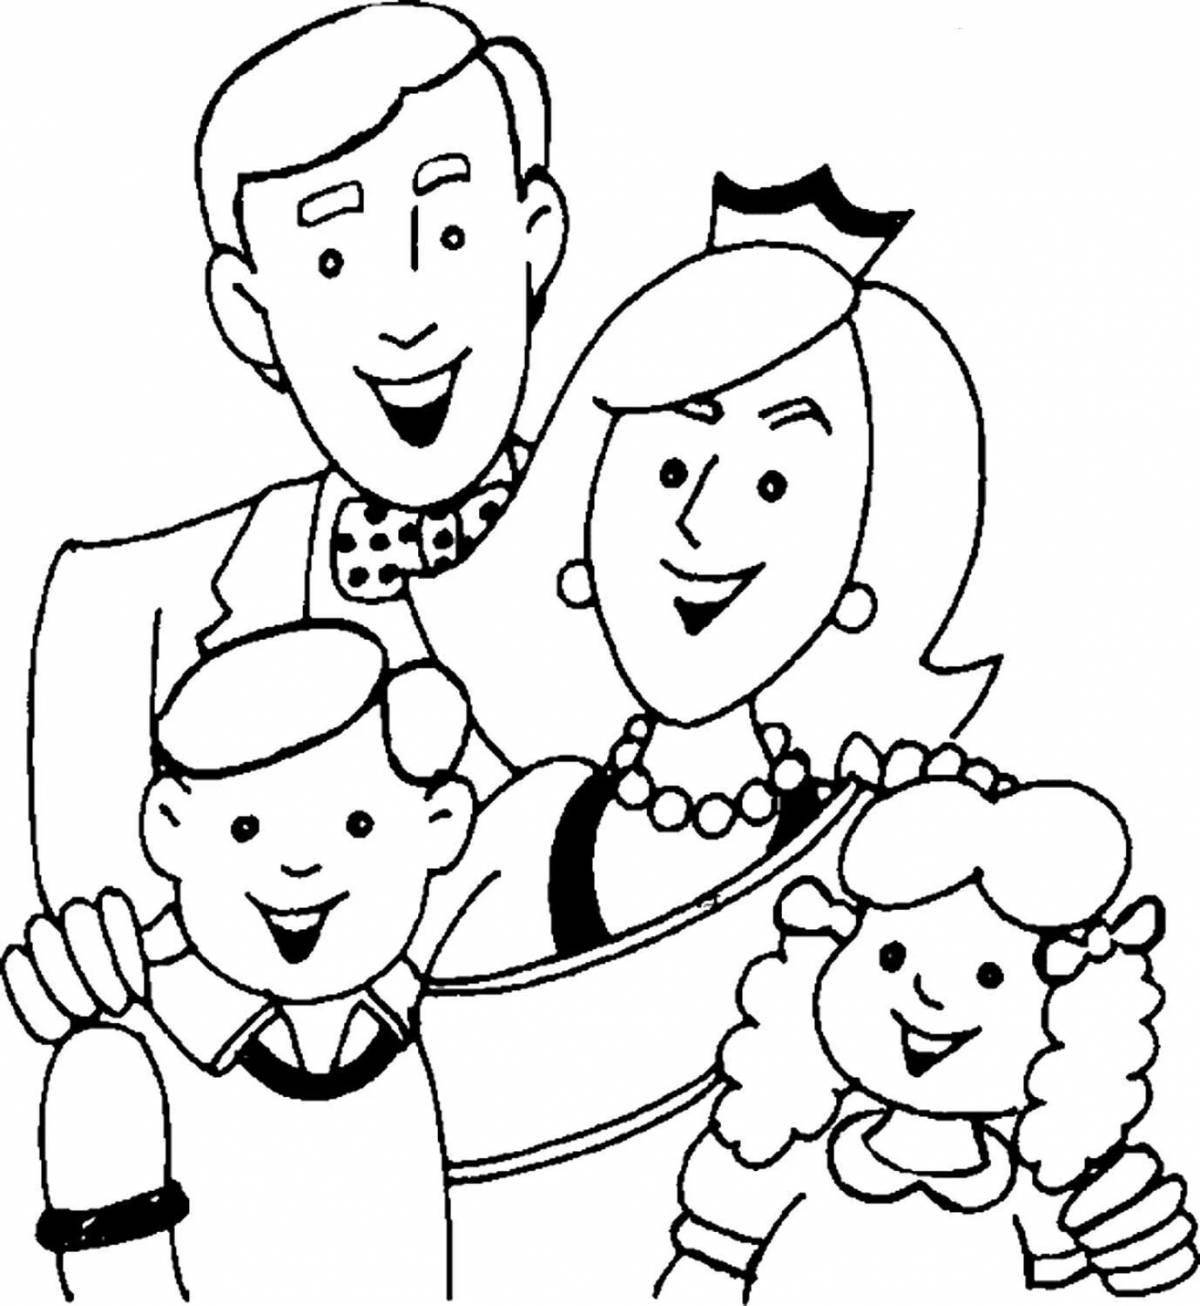 Joyful coloring mom and dad for kids